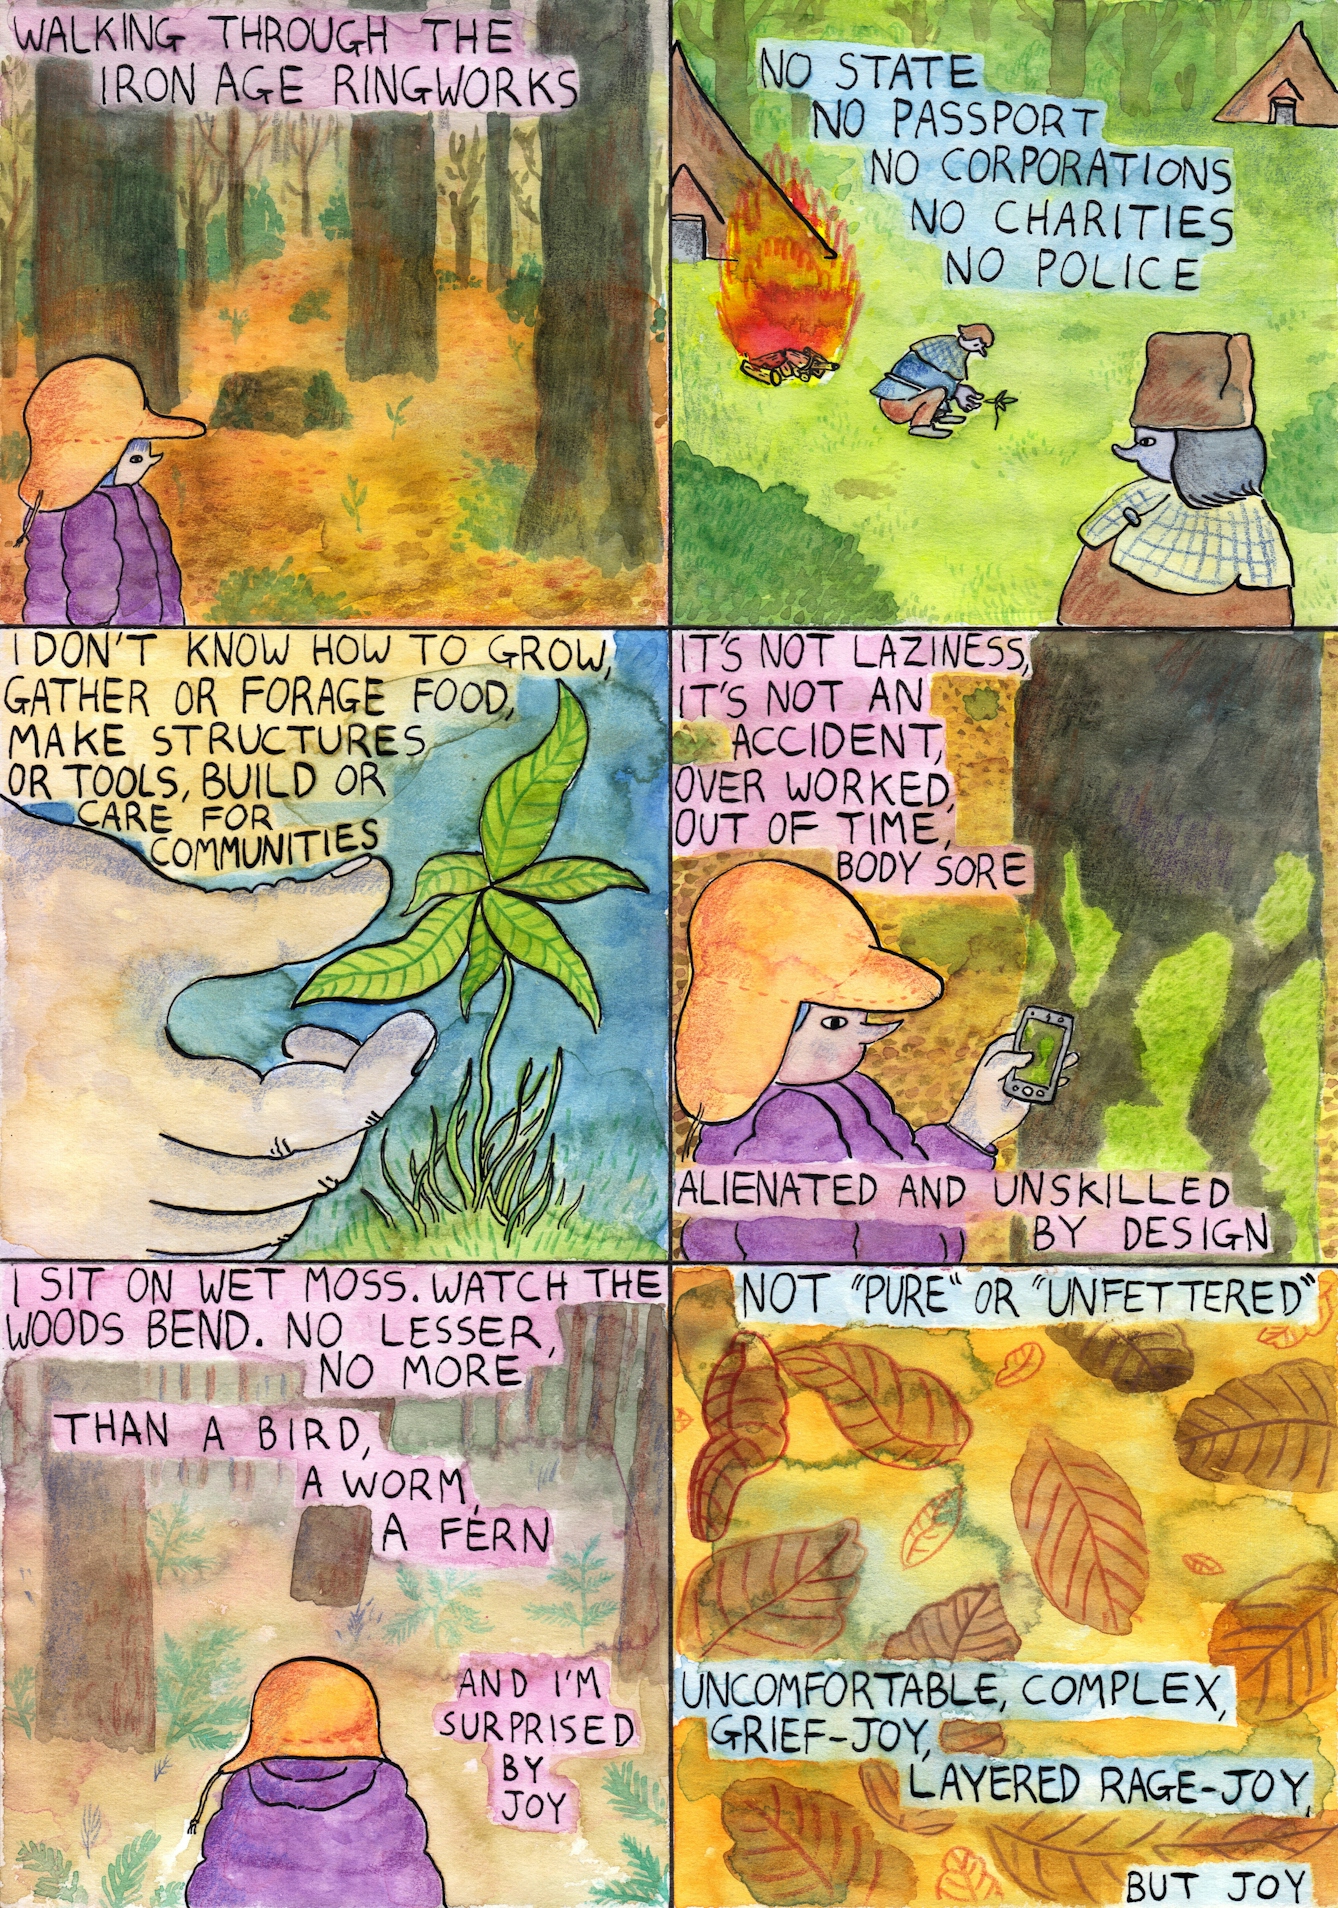 Six panel comic. 

The first panel shows a character in a yellow hat and purple coat standing in a forest. Text reads 'Walking through the Iron Age ringworks'. 

The second panel shows an outdoor setting with a character in the foreground wearing a brown hat watching another character planting a seedling in the ground. There is a small fire behind the gardener and several houses. Text reads 'No state, no passport, no corporations, no charities, no police'. 

Panel 3 shows a hand touching a plant seedling. Text reads 'I don't know how to grow, gather or forage food, make structures or tools, build or care for communities'. 

Panel 4 shows a character in an orange hat and purple jacket taking a picture on a mobile phone. Text reads 'It's not laziness, it's not an accident, over worked, out of time, body sore, alienated and unskilled by design'.

Panel 5 shows the character with an orange hat and purple coat standing in the forest. Text reads 'I sit on wet moss, watch the woods bend. No lesser, no more than a bird, a worm, a  fern and I'm surprised by joy'.

Panel 6 shows painted brown and orange leaves on an yellow background. Text reads 'Not "pure" or "unfettered", uncomfortable, complex, grief-joy, layered rage-joy, but joy'. 